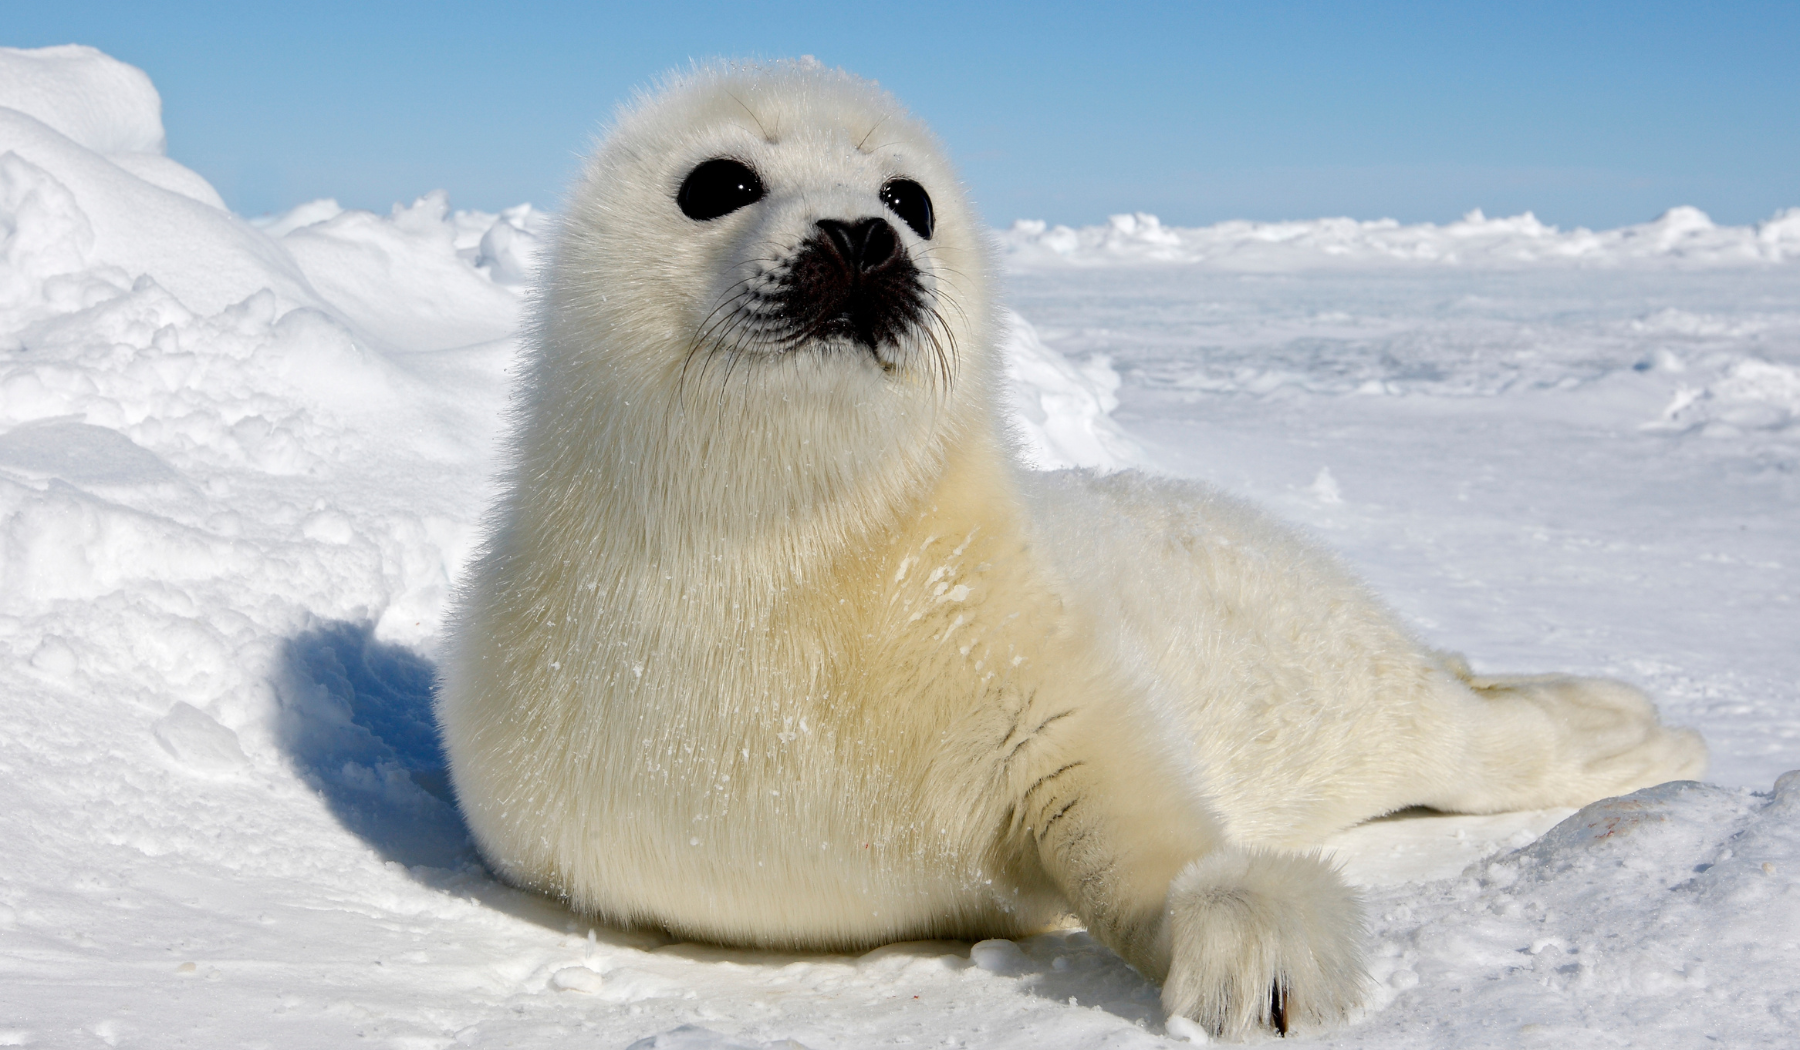 Seals, life and facts